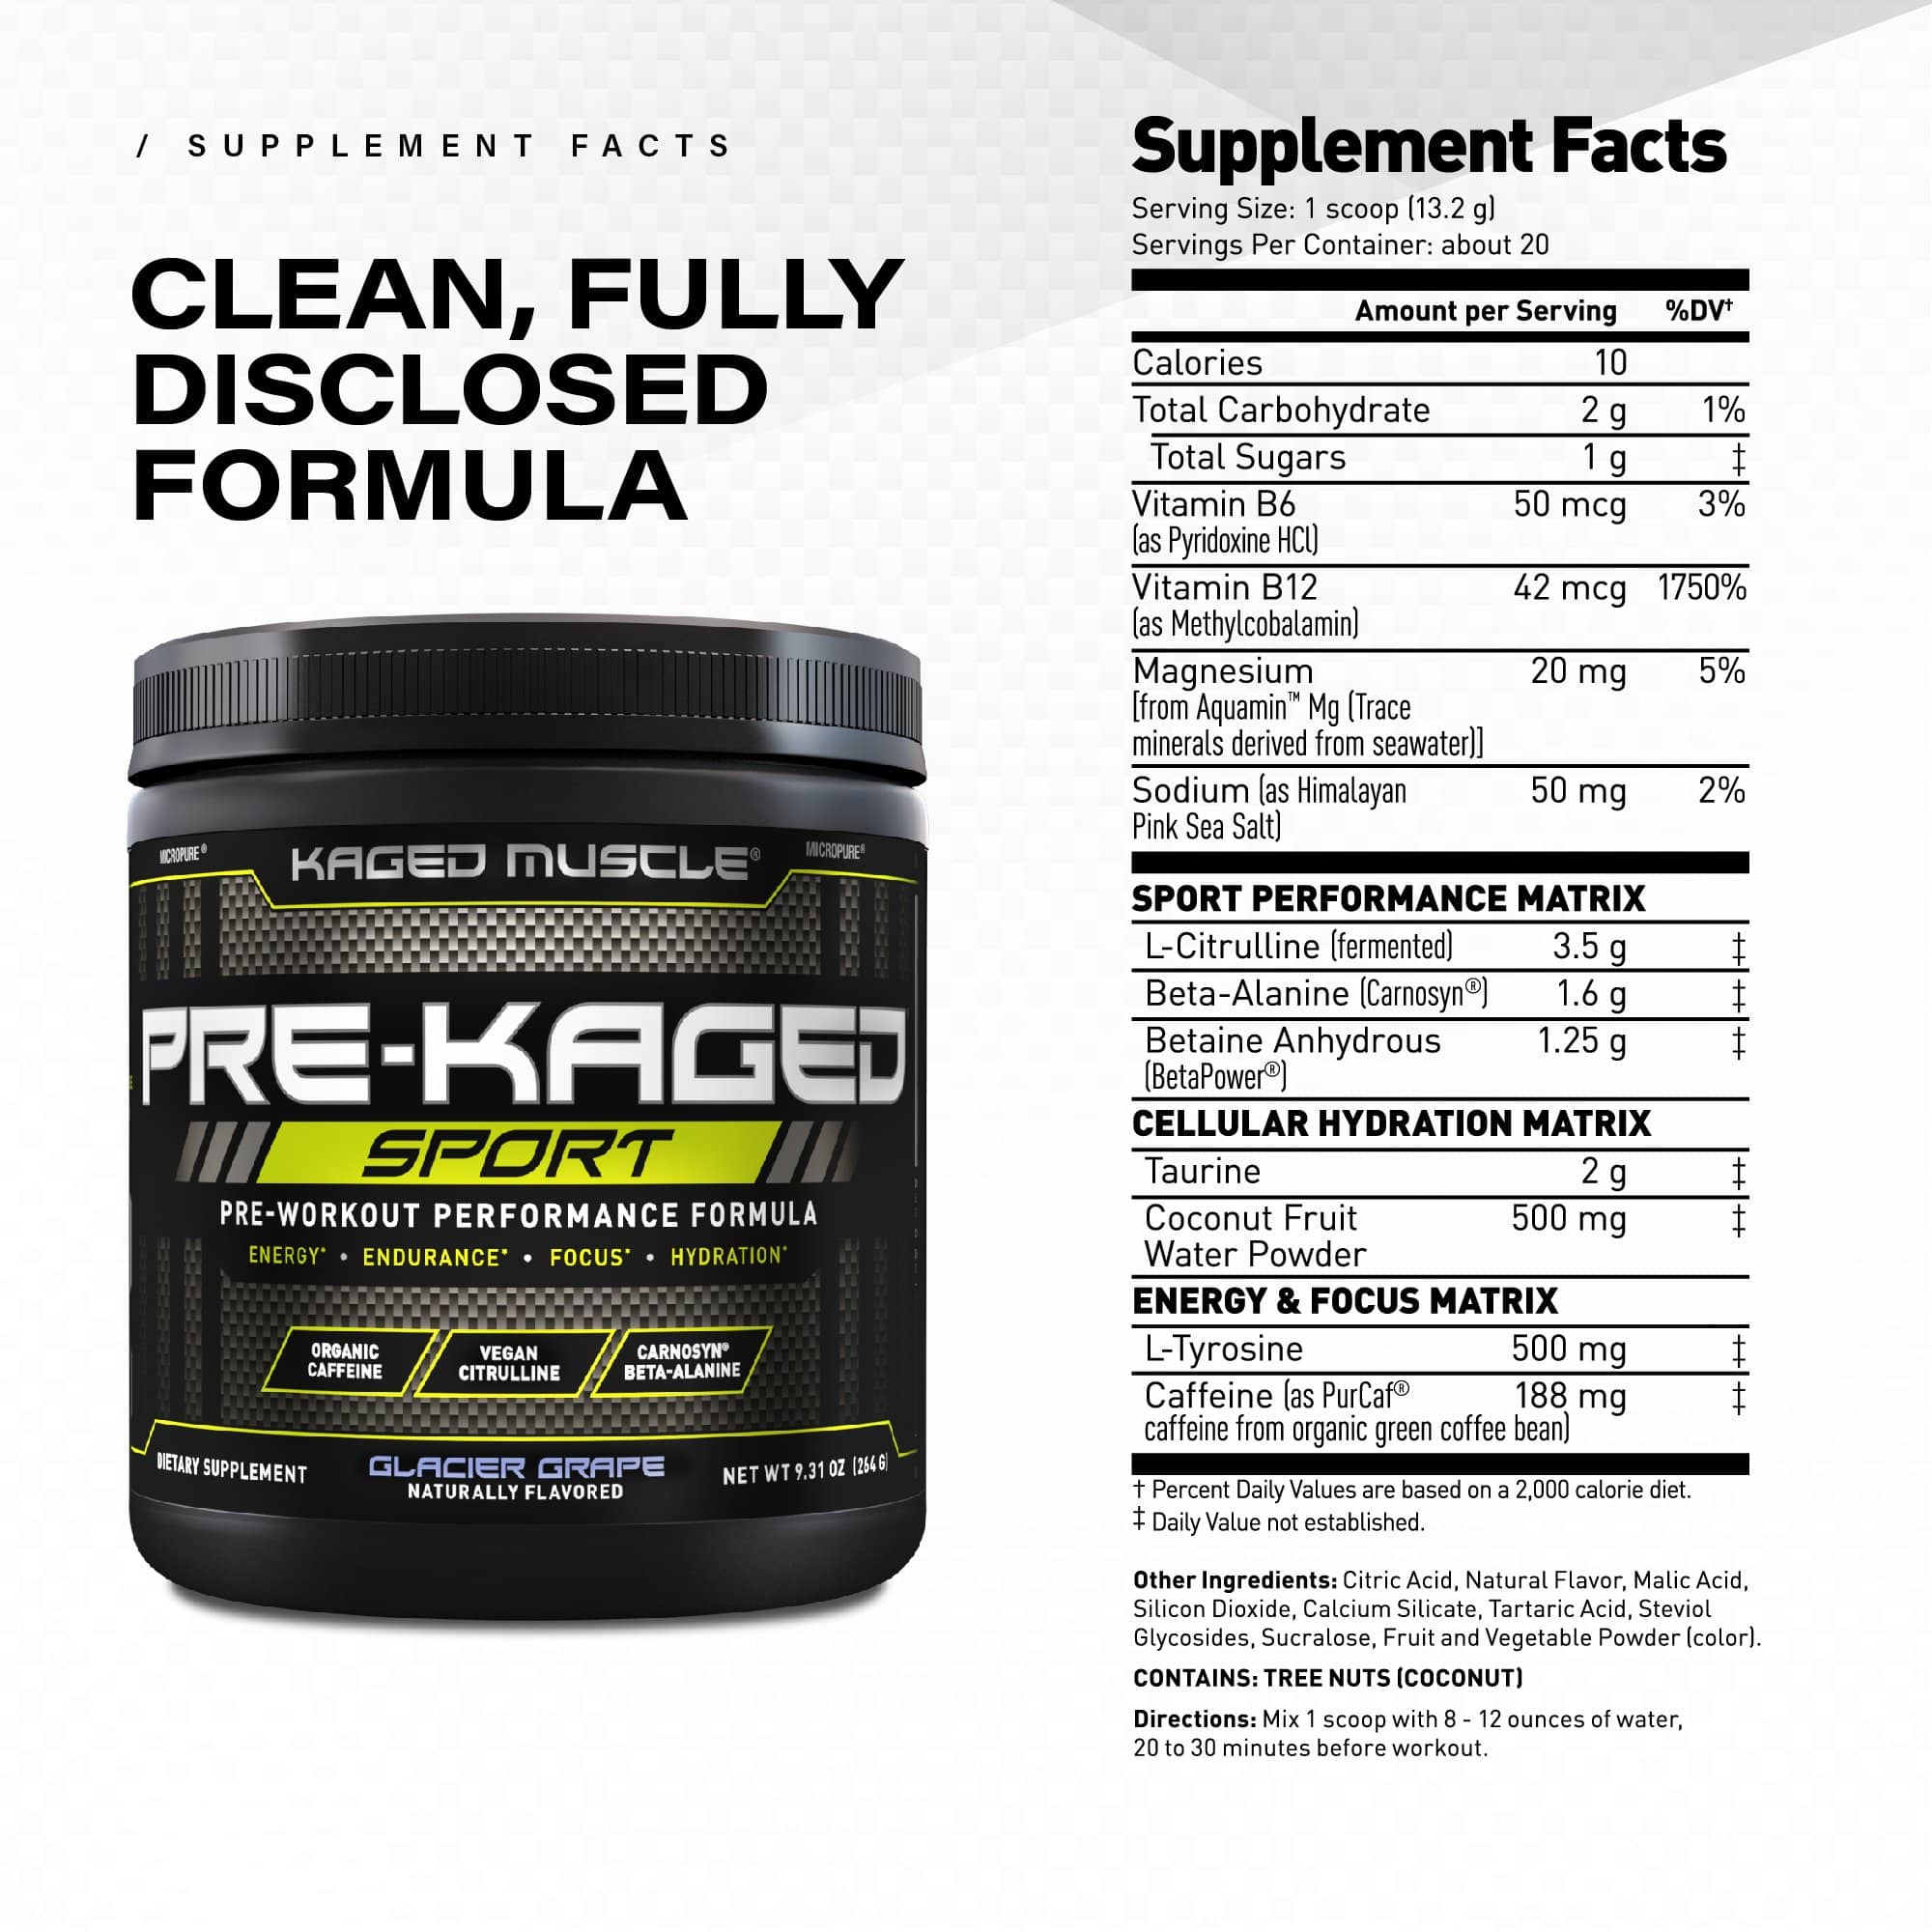 Kaged MusclePRE-KAGED® SportPre-WorkoutRED SUPPS